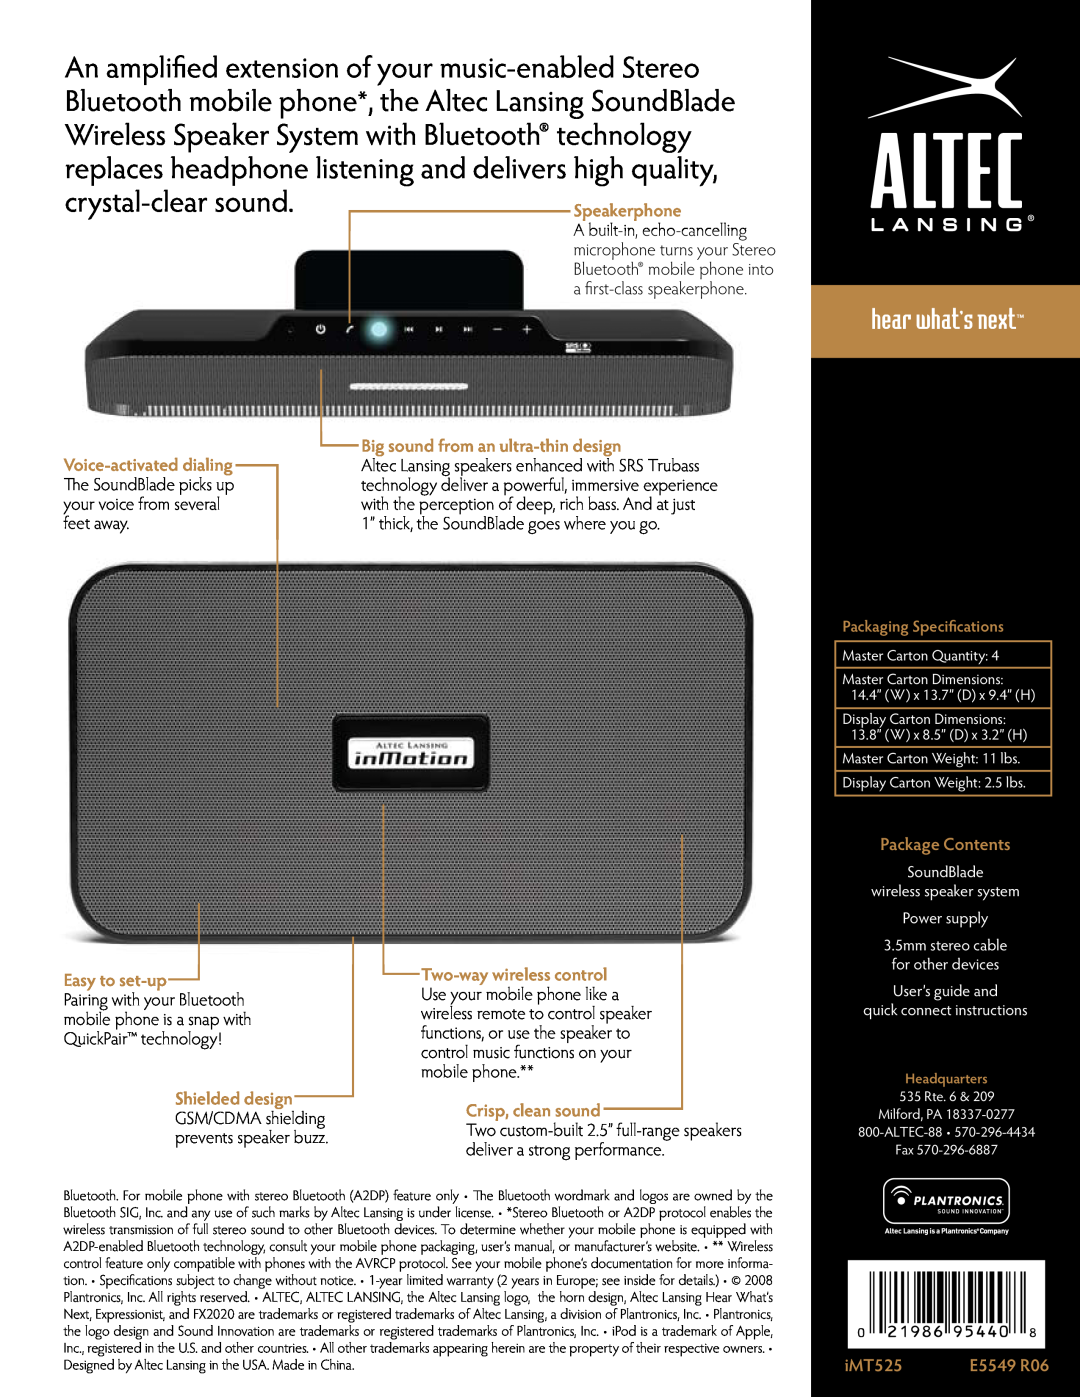 Altec Lansing iMT525 manual Big sound from an ultra-thindesign, The SoundBlade picks up, your voice from several, feet away 